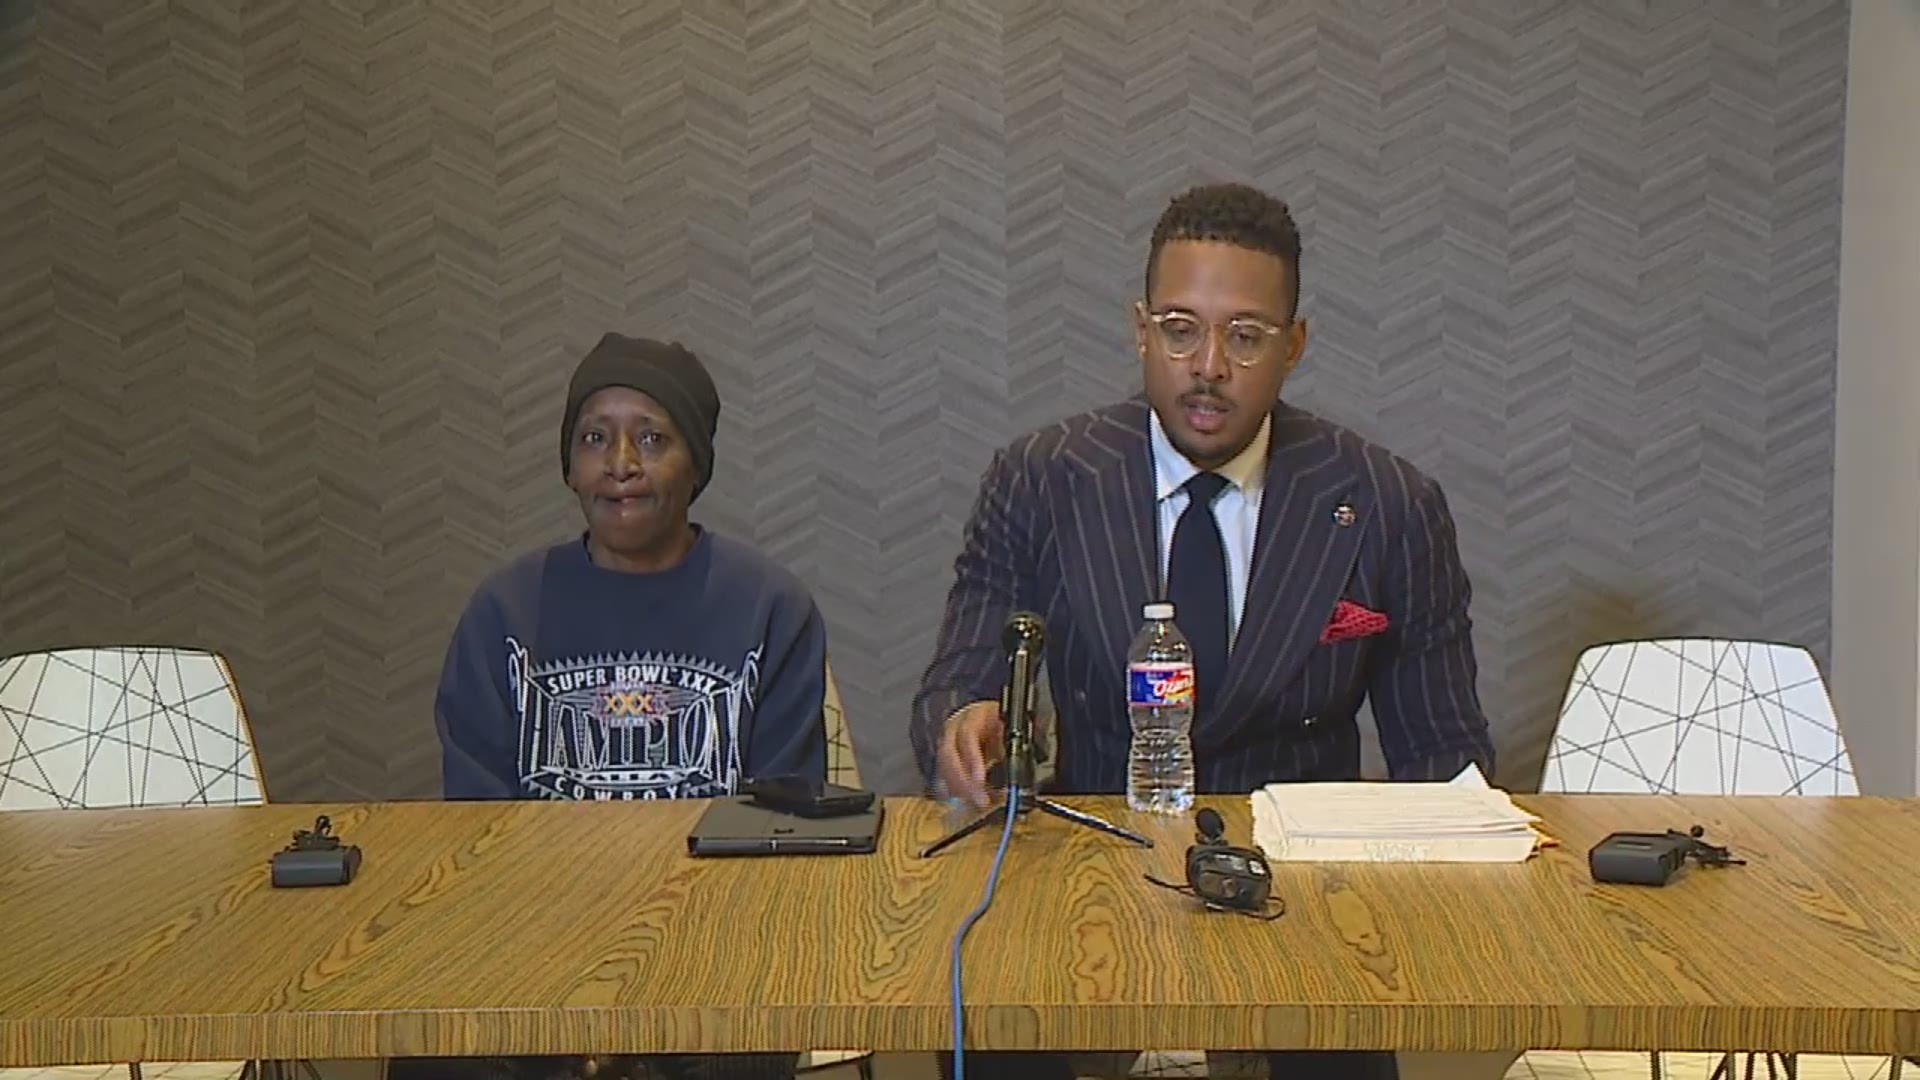 Dallas attorney Justin Moore is representing the family of Diamond Ross, who died after she was taken in police custody. Video footage shows her unconscious in jail.